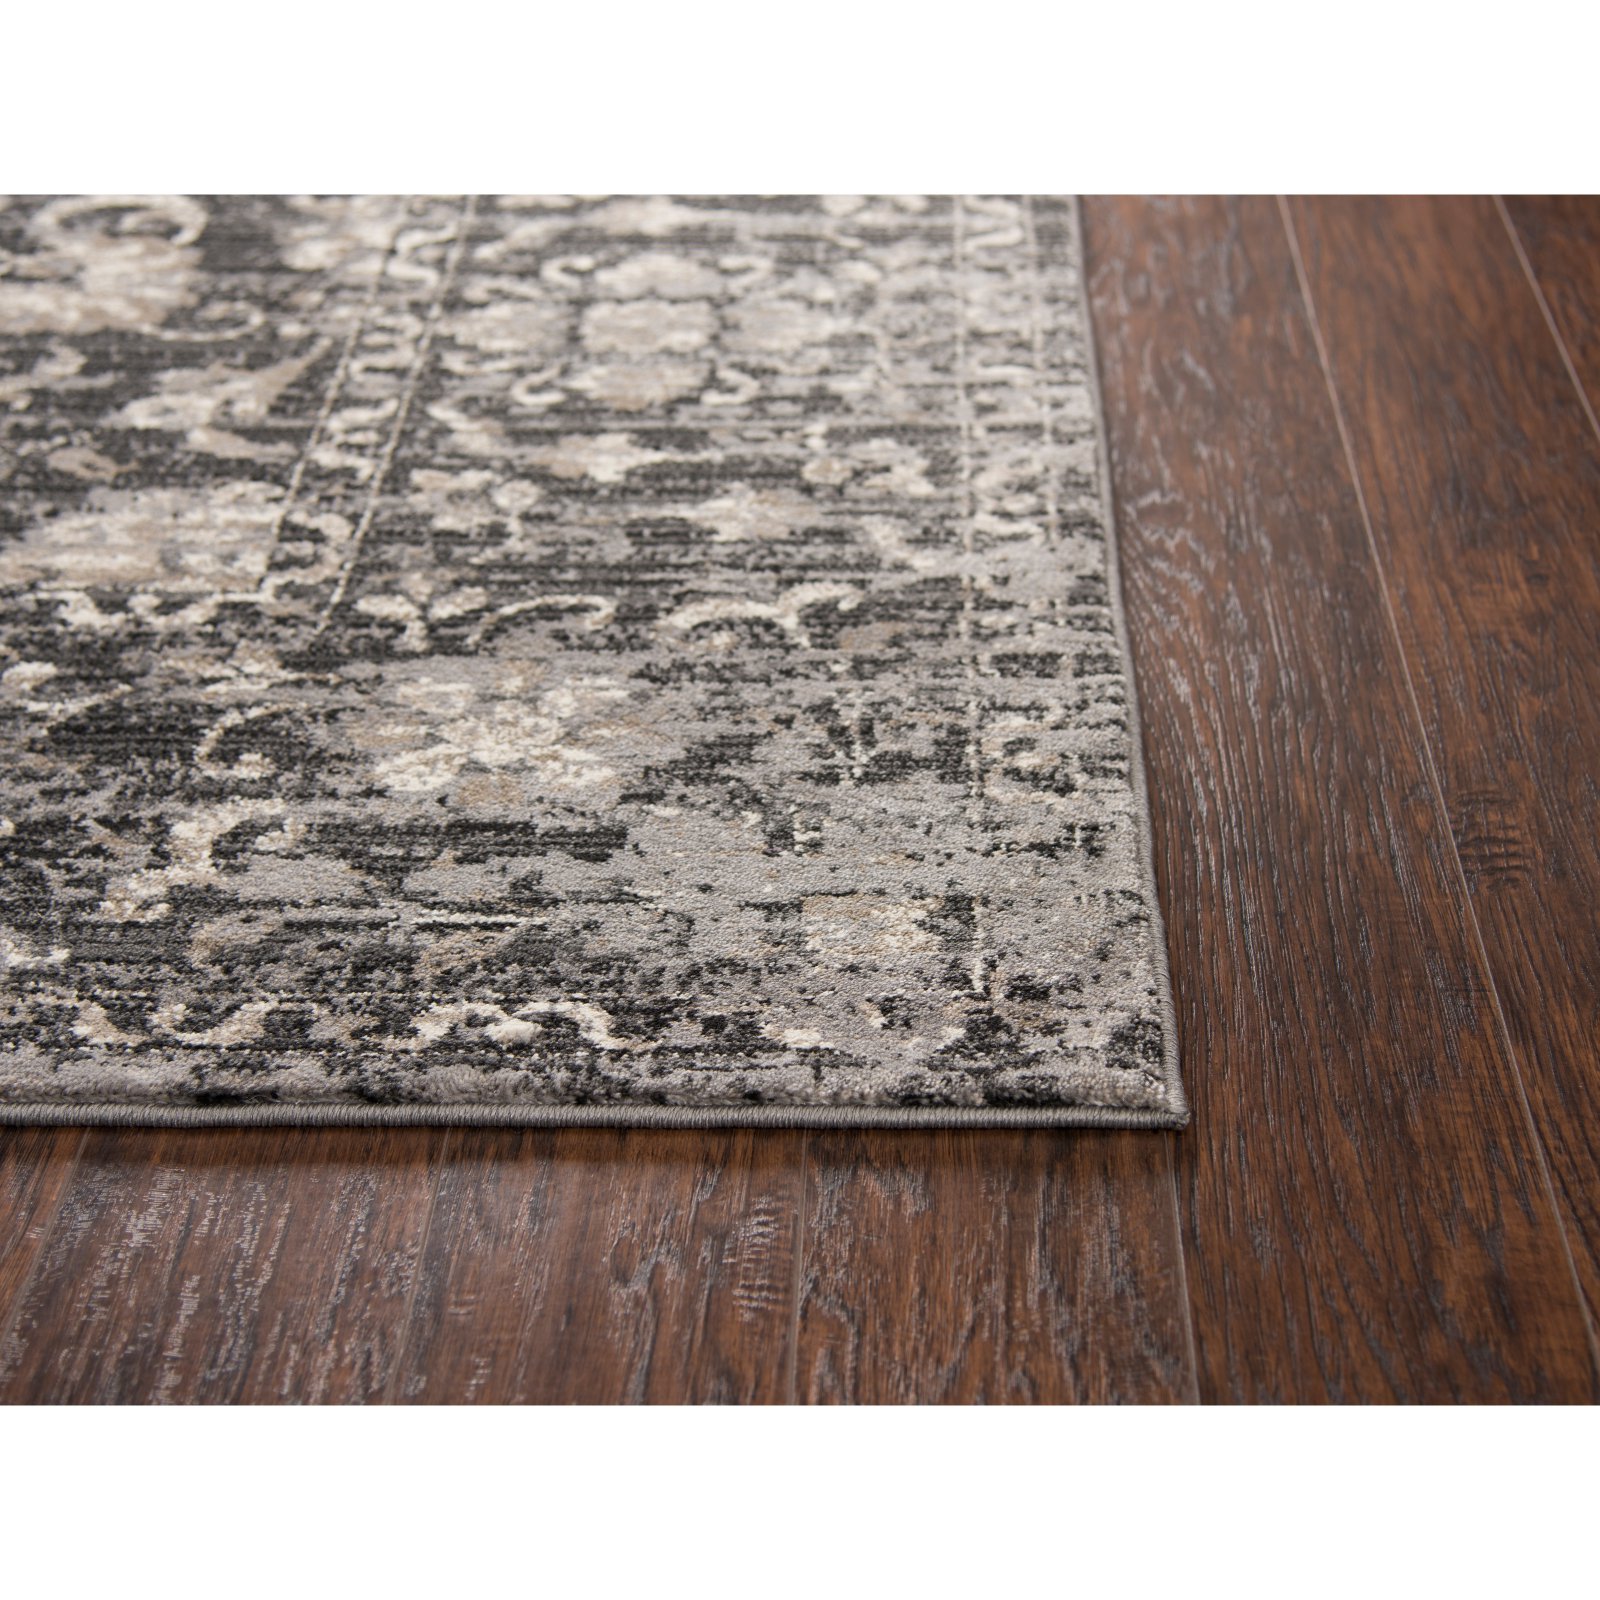 Rizzy Home Panache PN6986 Indoor Area Rug - image 4 of 6